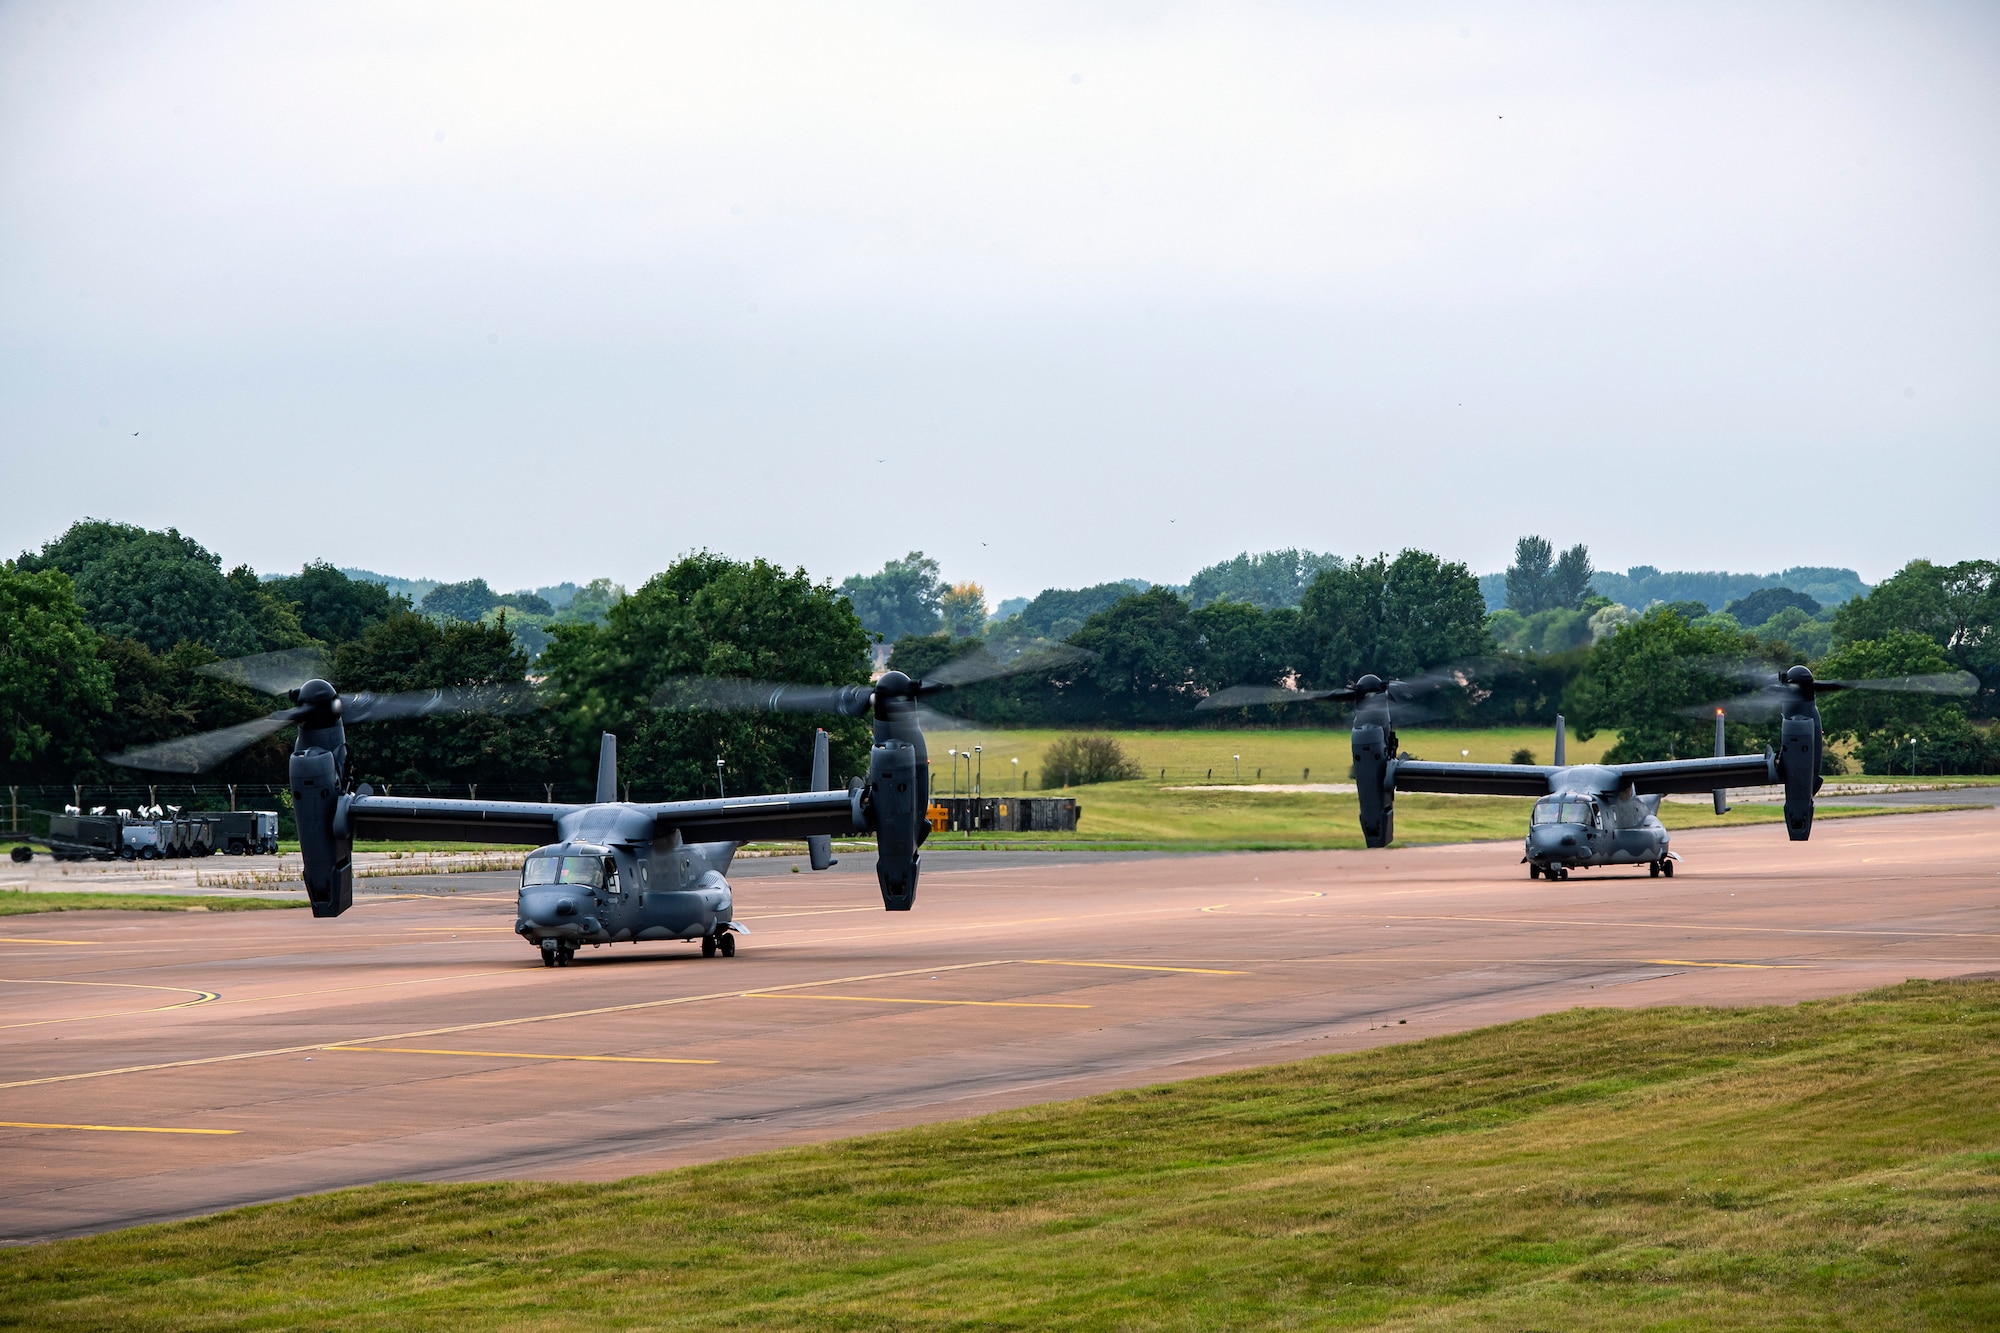 Two CV-22A Ospreys assigned to the 352d Special Operations Wing taxi on the flightline during an Agile Combat Employment exercise at RAF Fairford, England, Sept. 13, 2021. The exercise enables U.S. forces in Europe to operate from locations with varying levels of capacity and support. This further ensures Airmen and aircrews are postured to deliver lethal combat power across the full spectrum of military operations. (U.S. Air Force photo by Senior Airman Eugene Oliver)